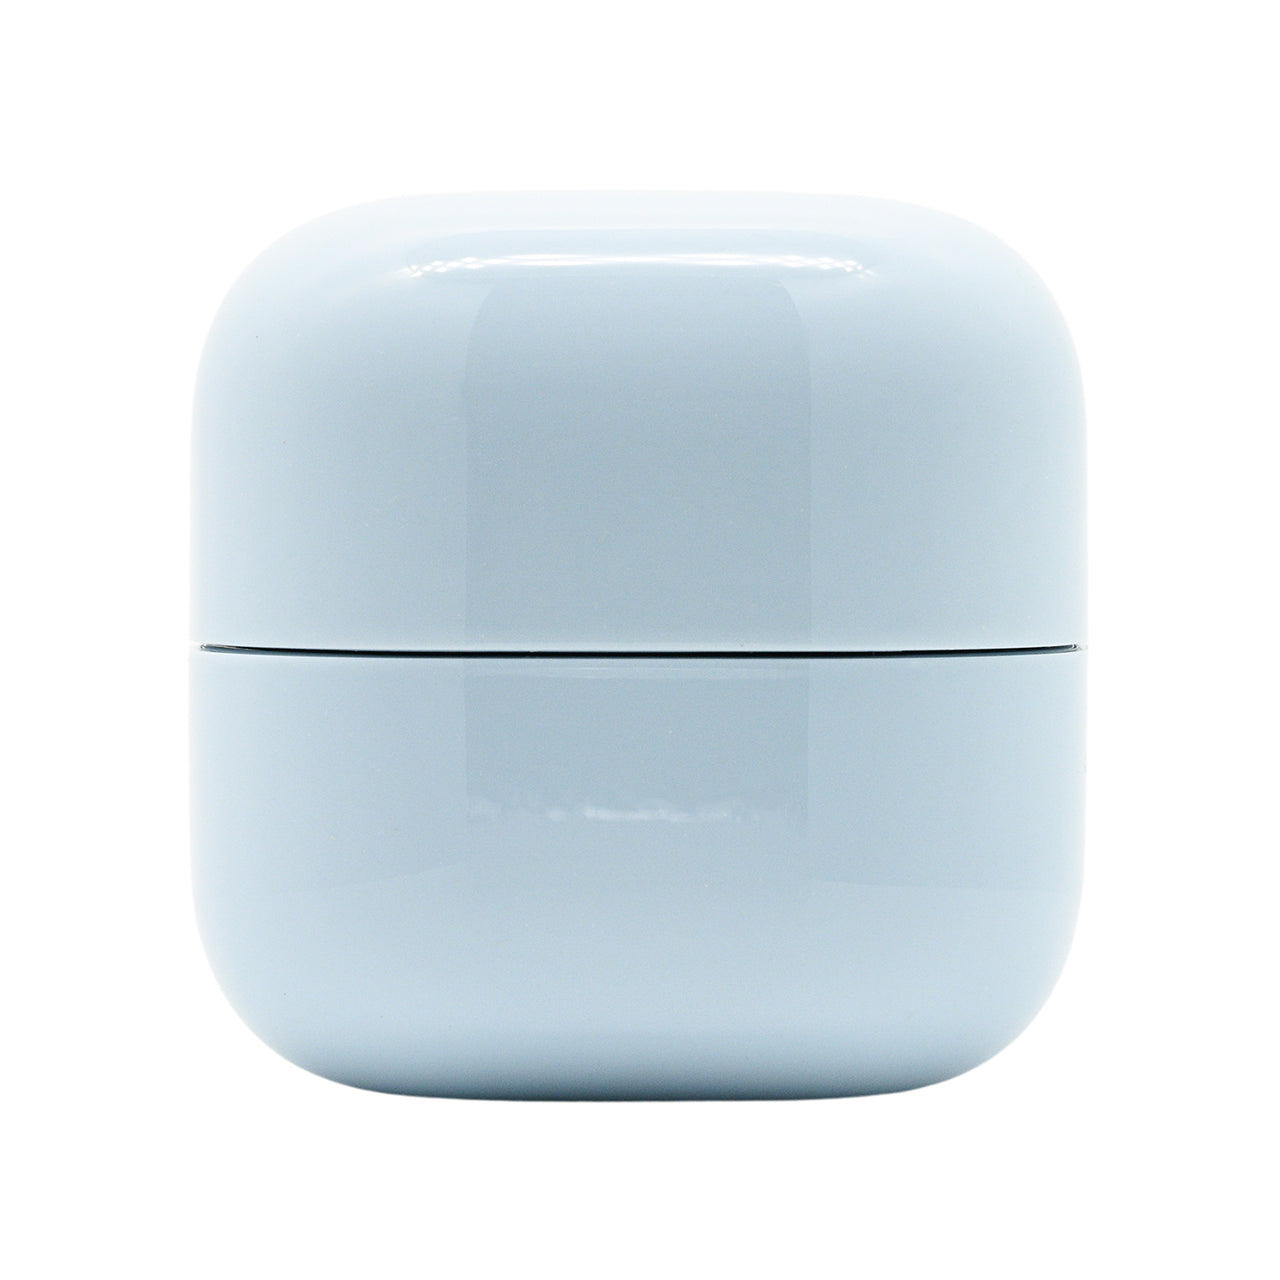 Laneige Water Bank Blue Hyaluronic Cream For Combination To Oily Skin  50ml